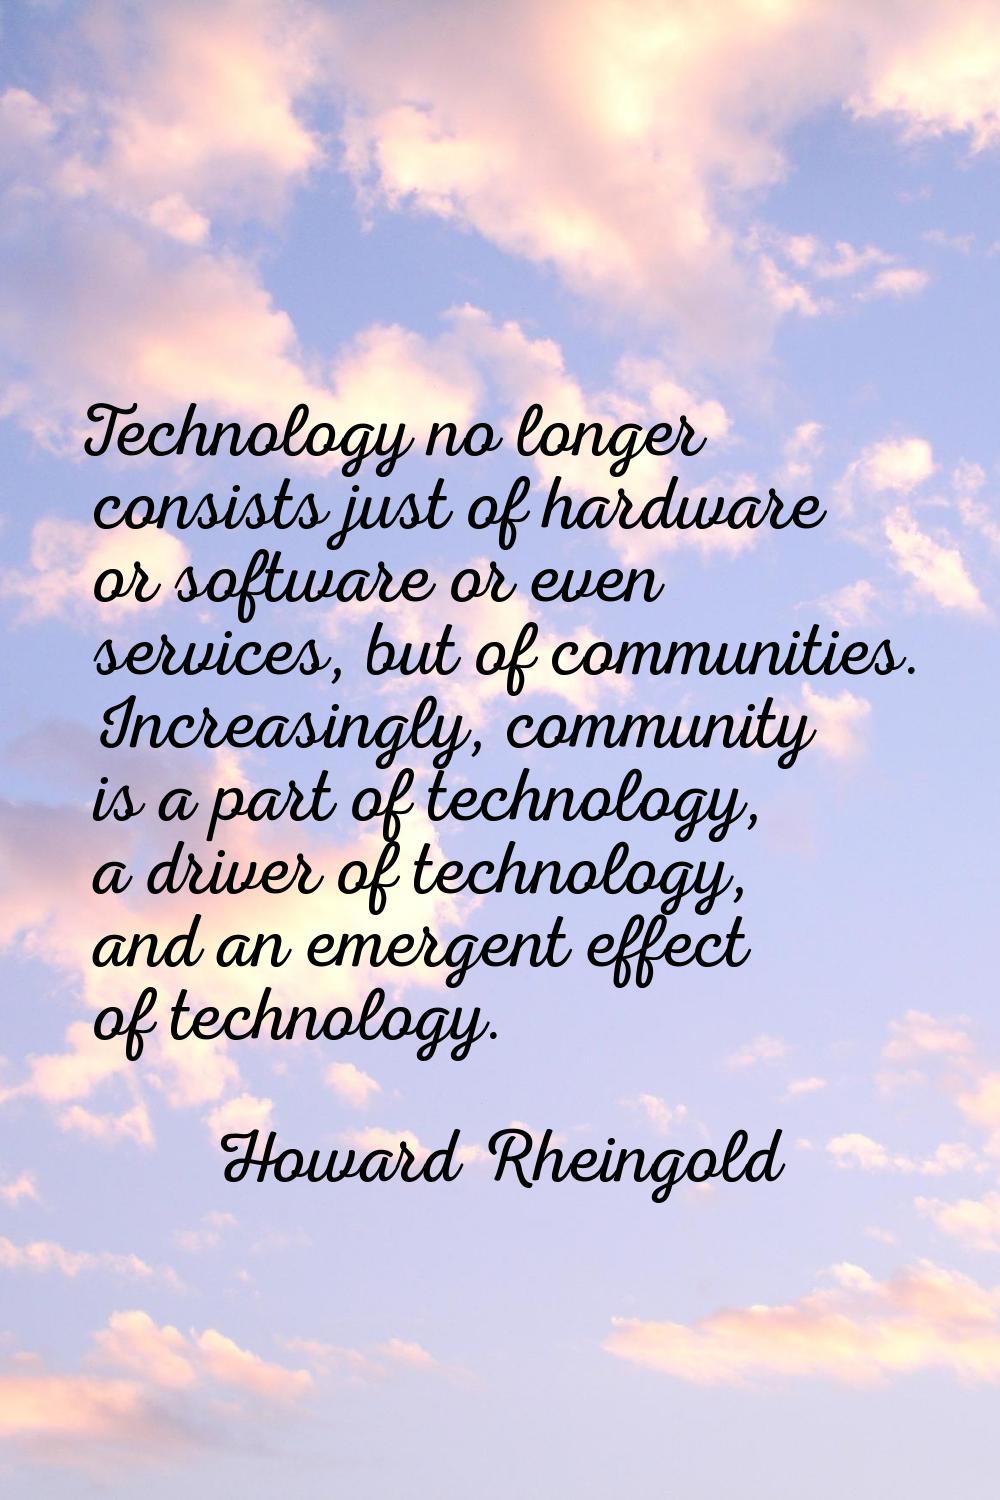 Technology no longer consists just of hardware or software or even services, but of communities. In